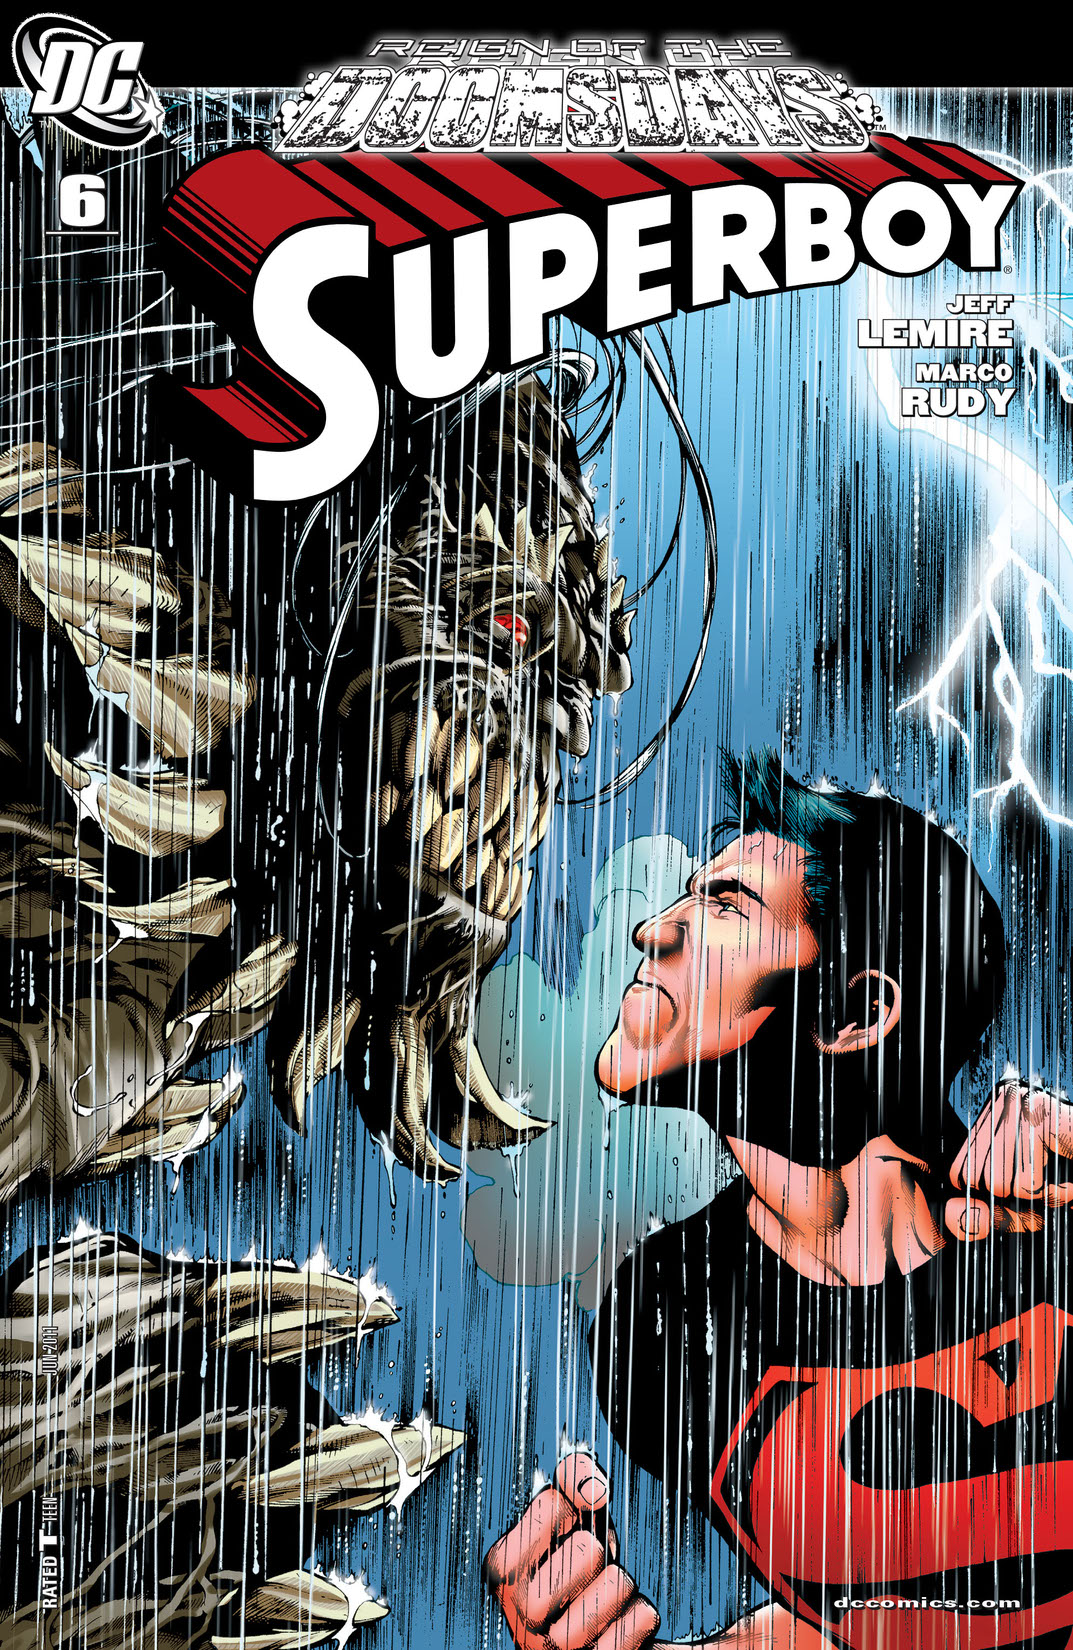 Superboy (2010-) #6 preview images